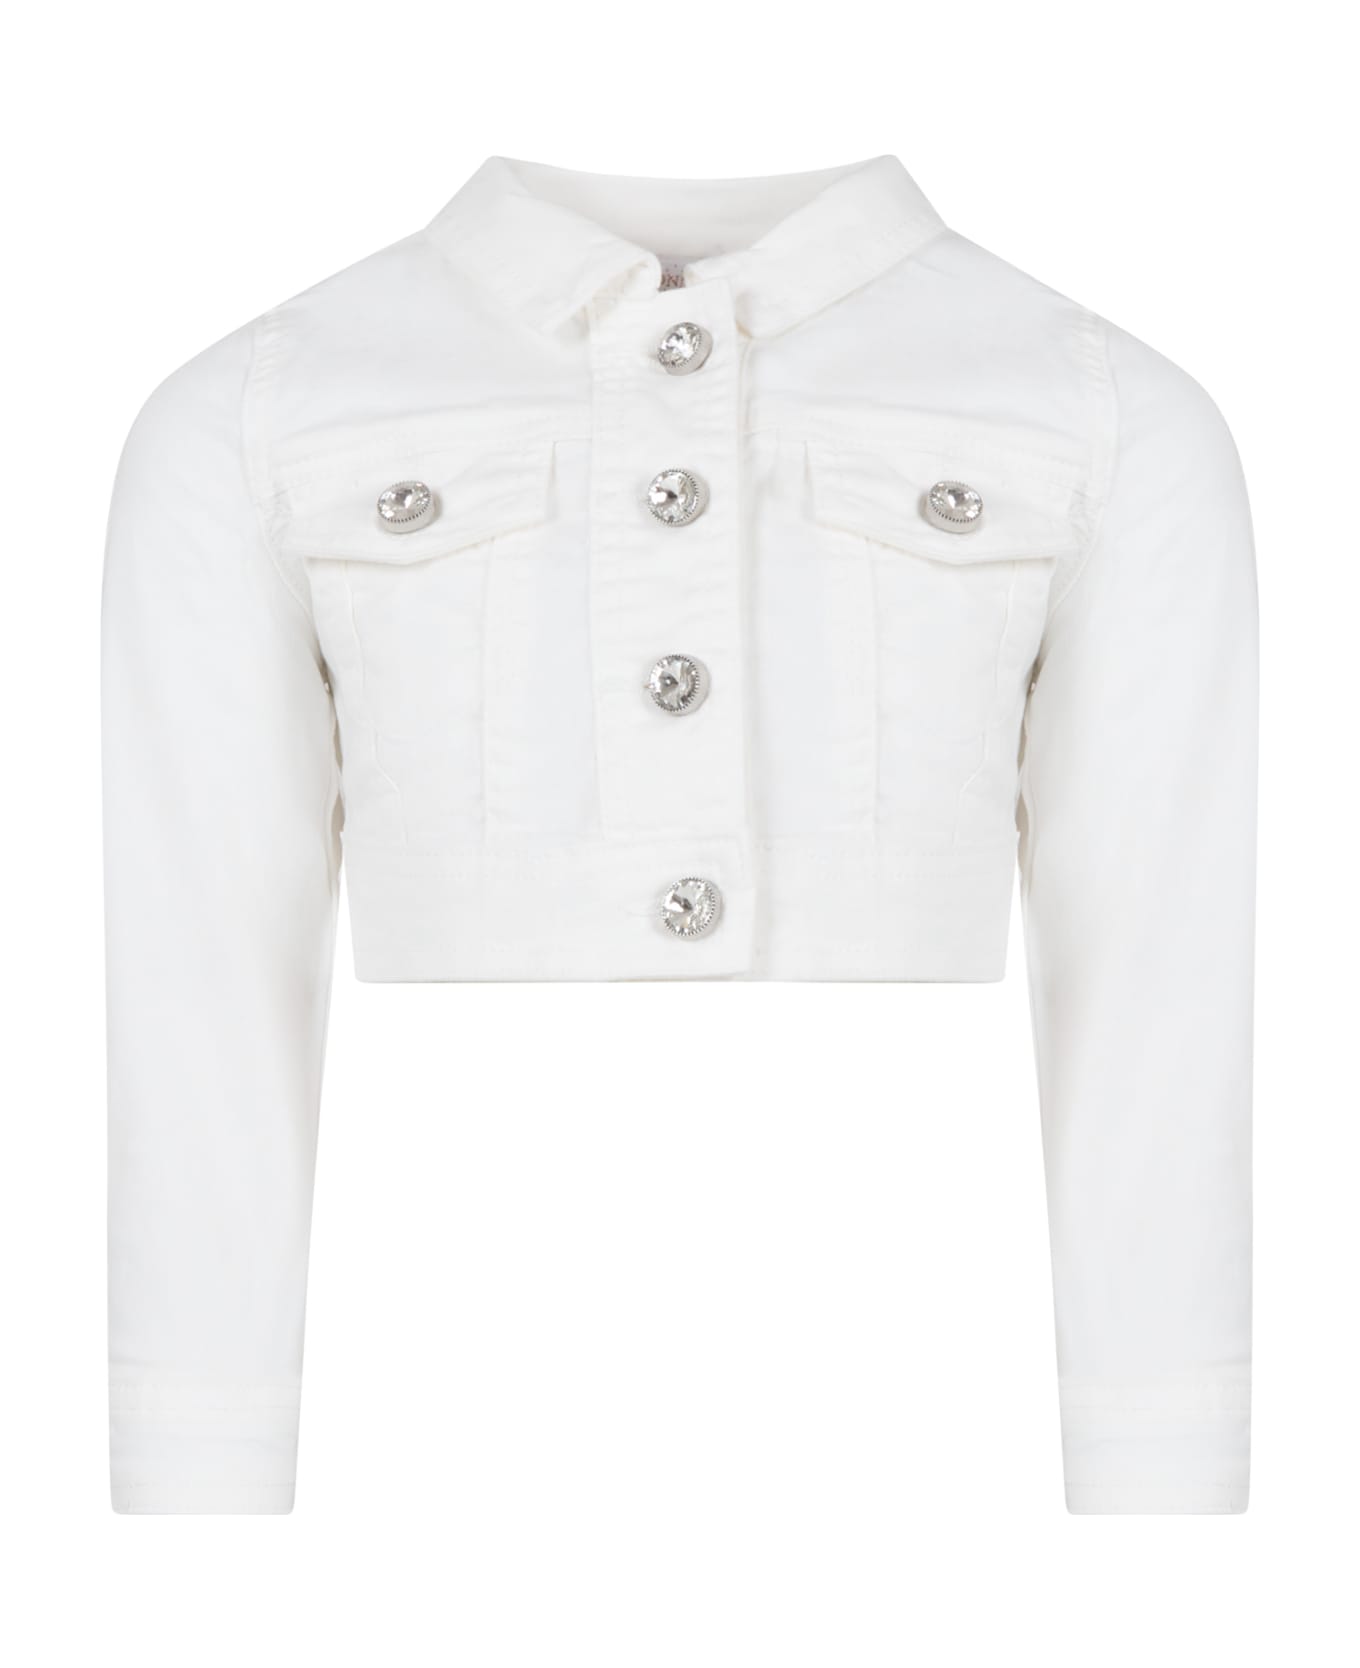 Monnalisa White Jacket For Girl With Jewel Buttons - White コート＆ジャケット